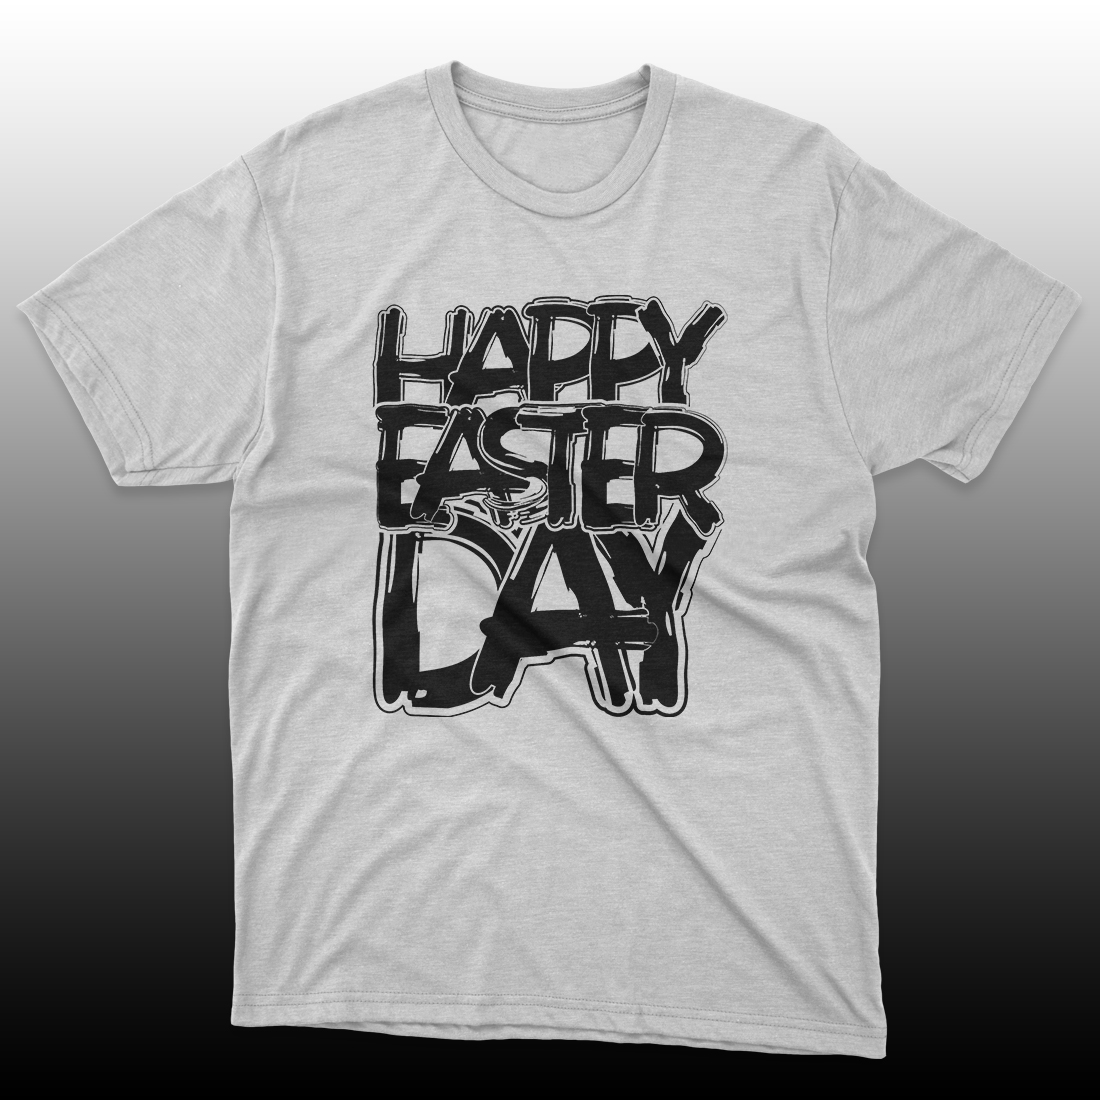 Easter Day T-shirt Happy Easter Day preview image.